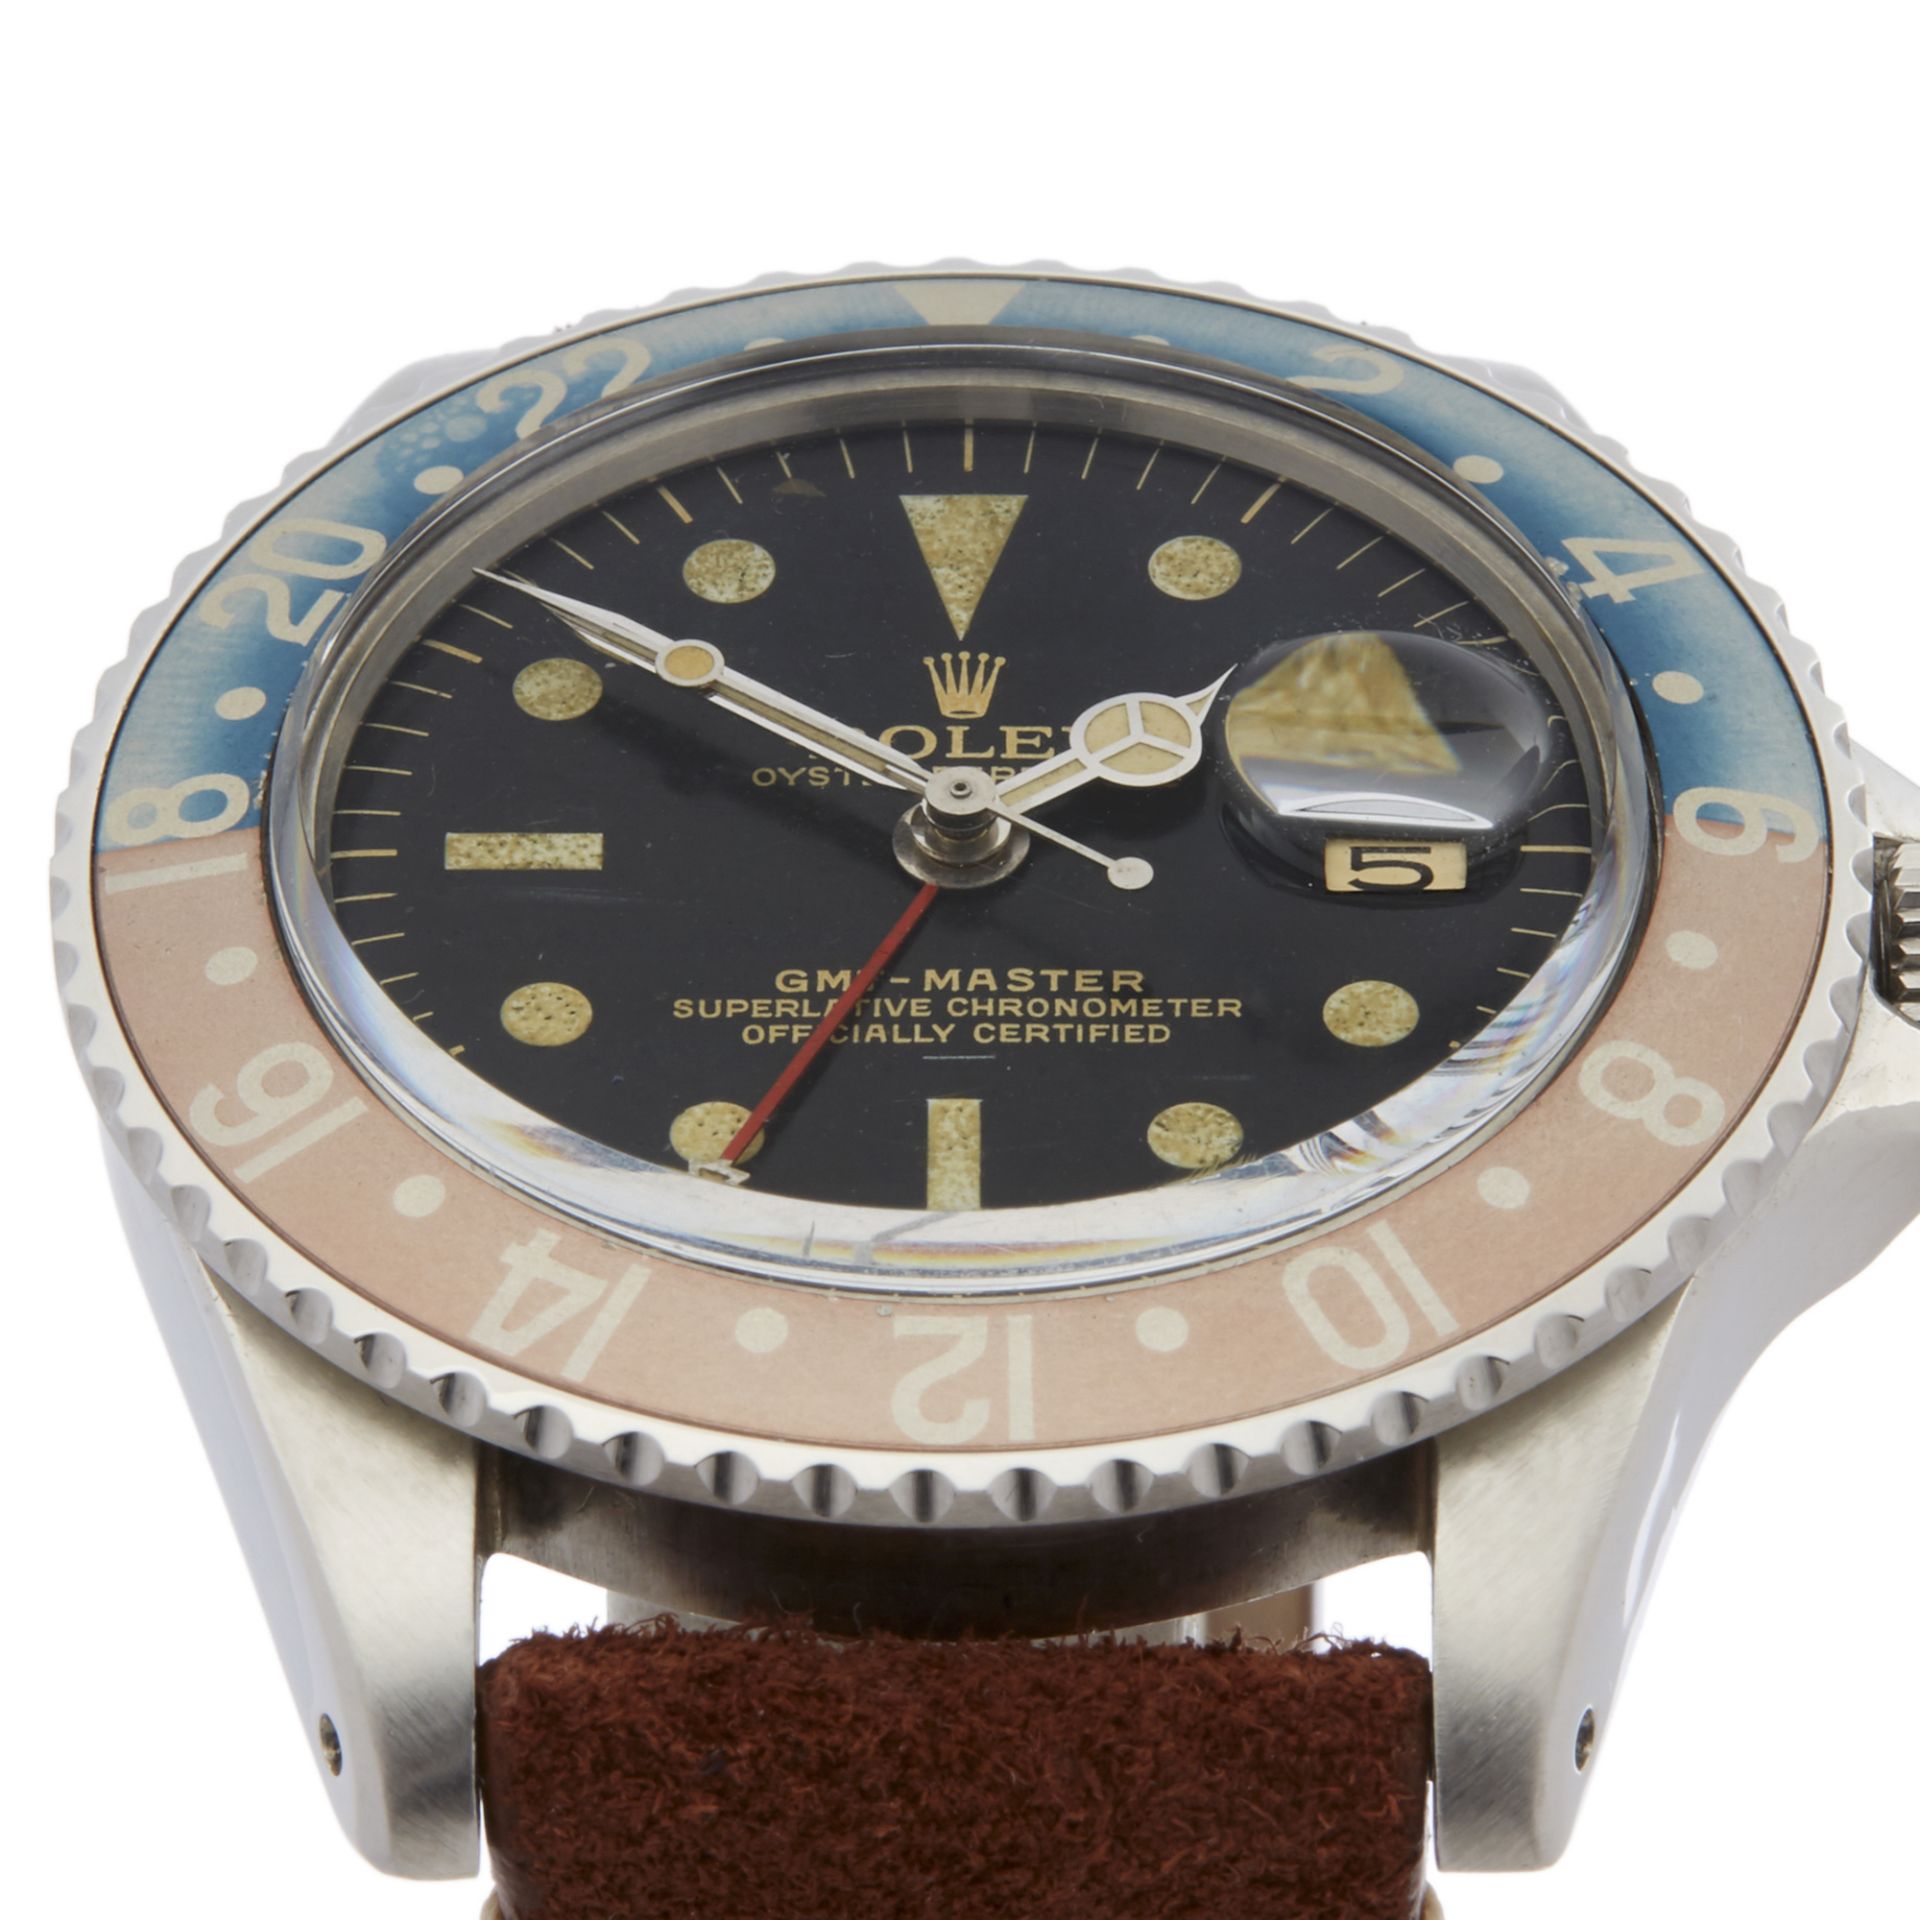 1954 GMT-Master Pepsi Guilt Gloss Small GMT Hand Underline Stainless Steel - 1675 - Image 11 of 15